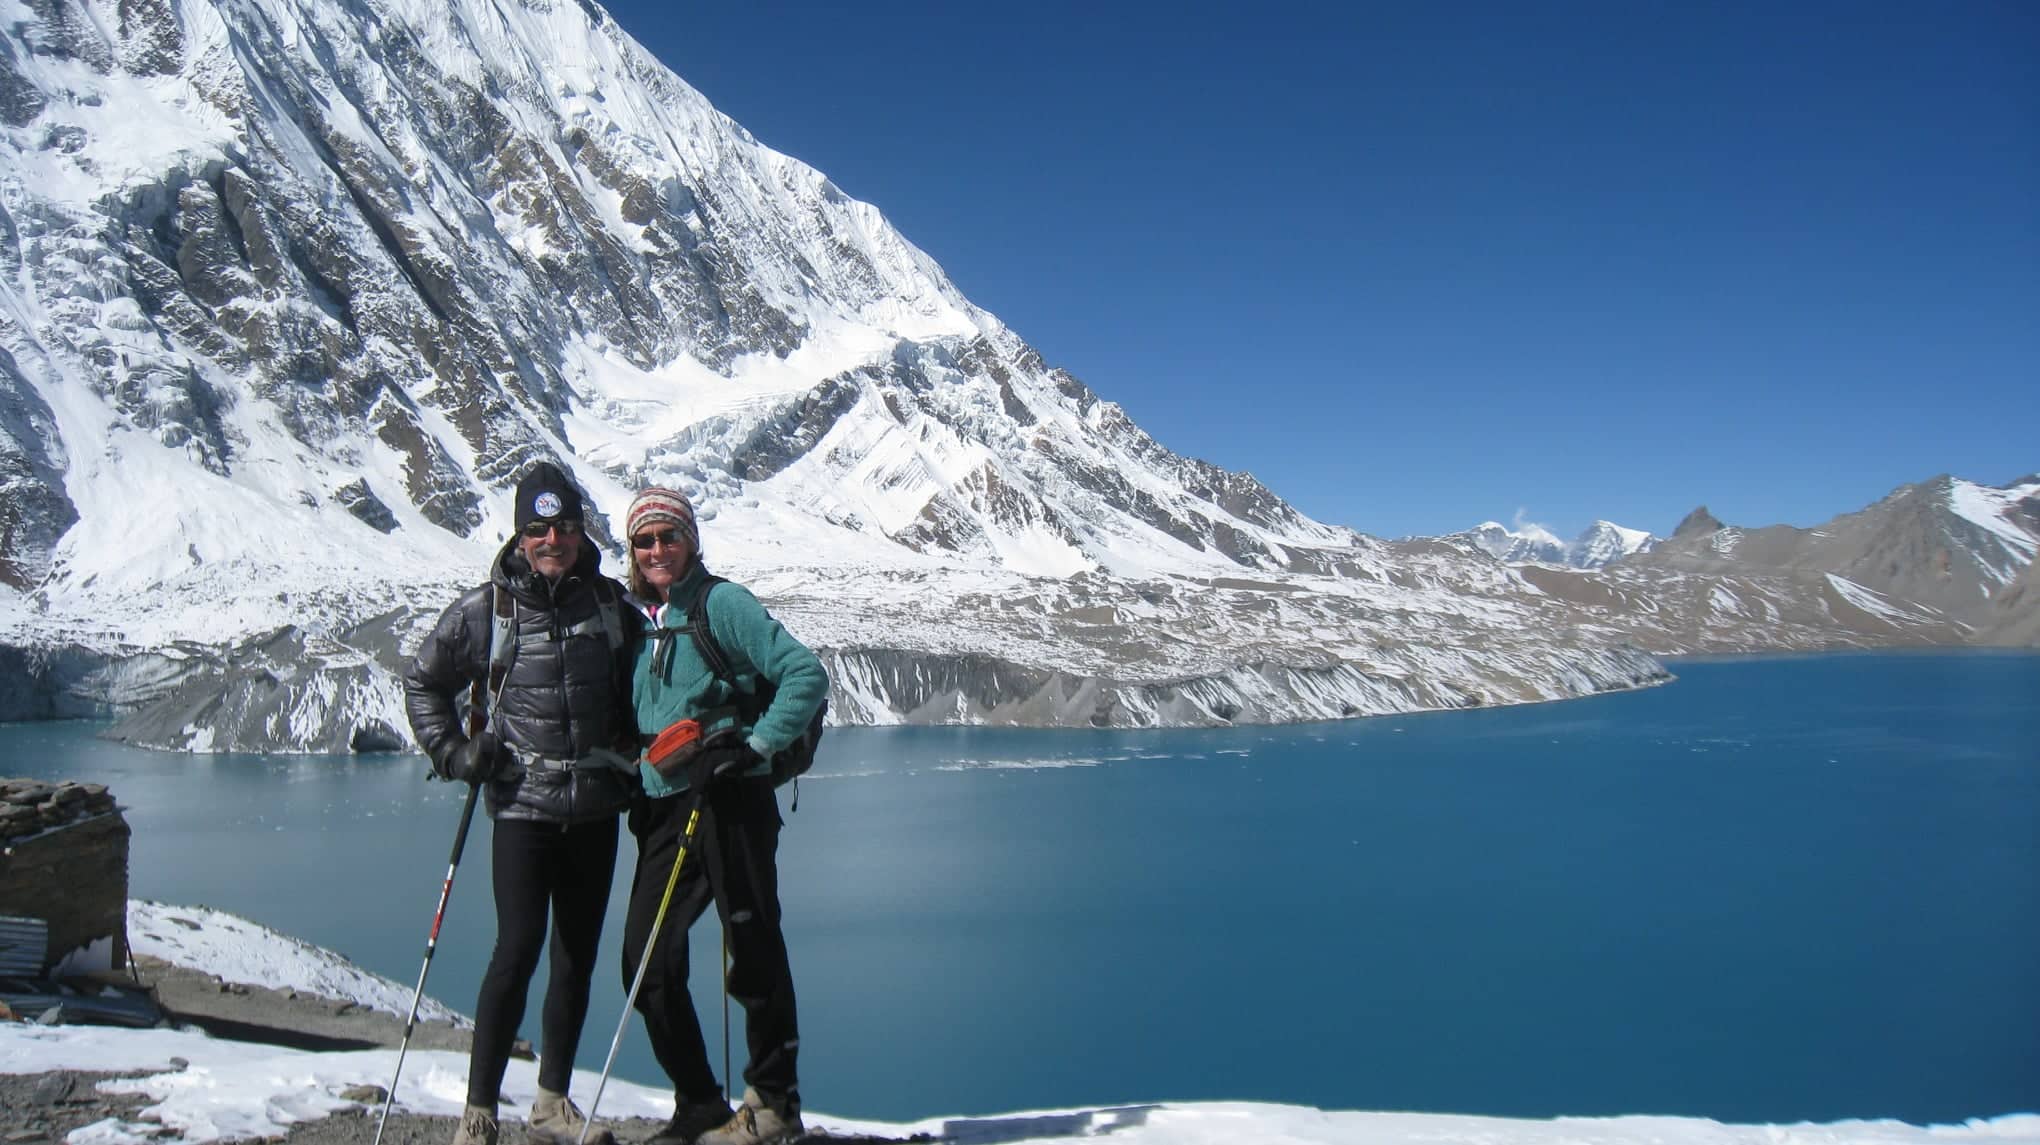 Round Annapurna with Tilicho Taal